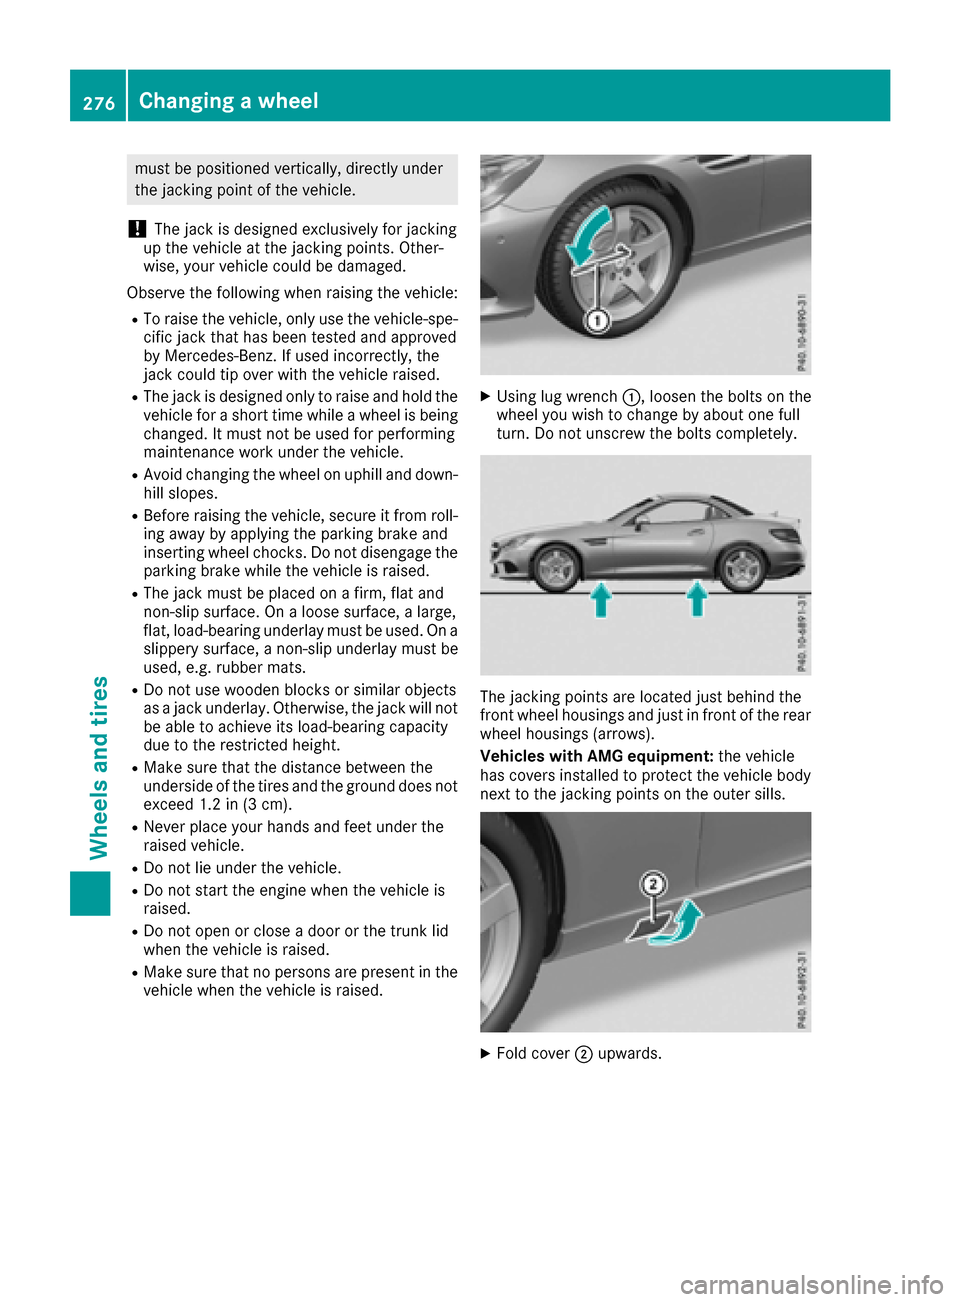 MERCEDES-BENZ SLC-Class 2017 R172 Owners Manual must be positioned vertically, directly under
the jacking point of the vehicle.
!The jack is designed exclusively for jacking
up the vehicleatt he jacking points. Other-
wise ,you rv ehiclec ould be d